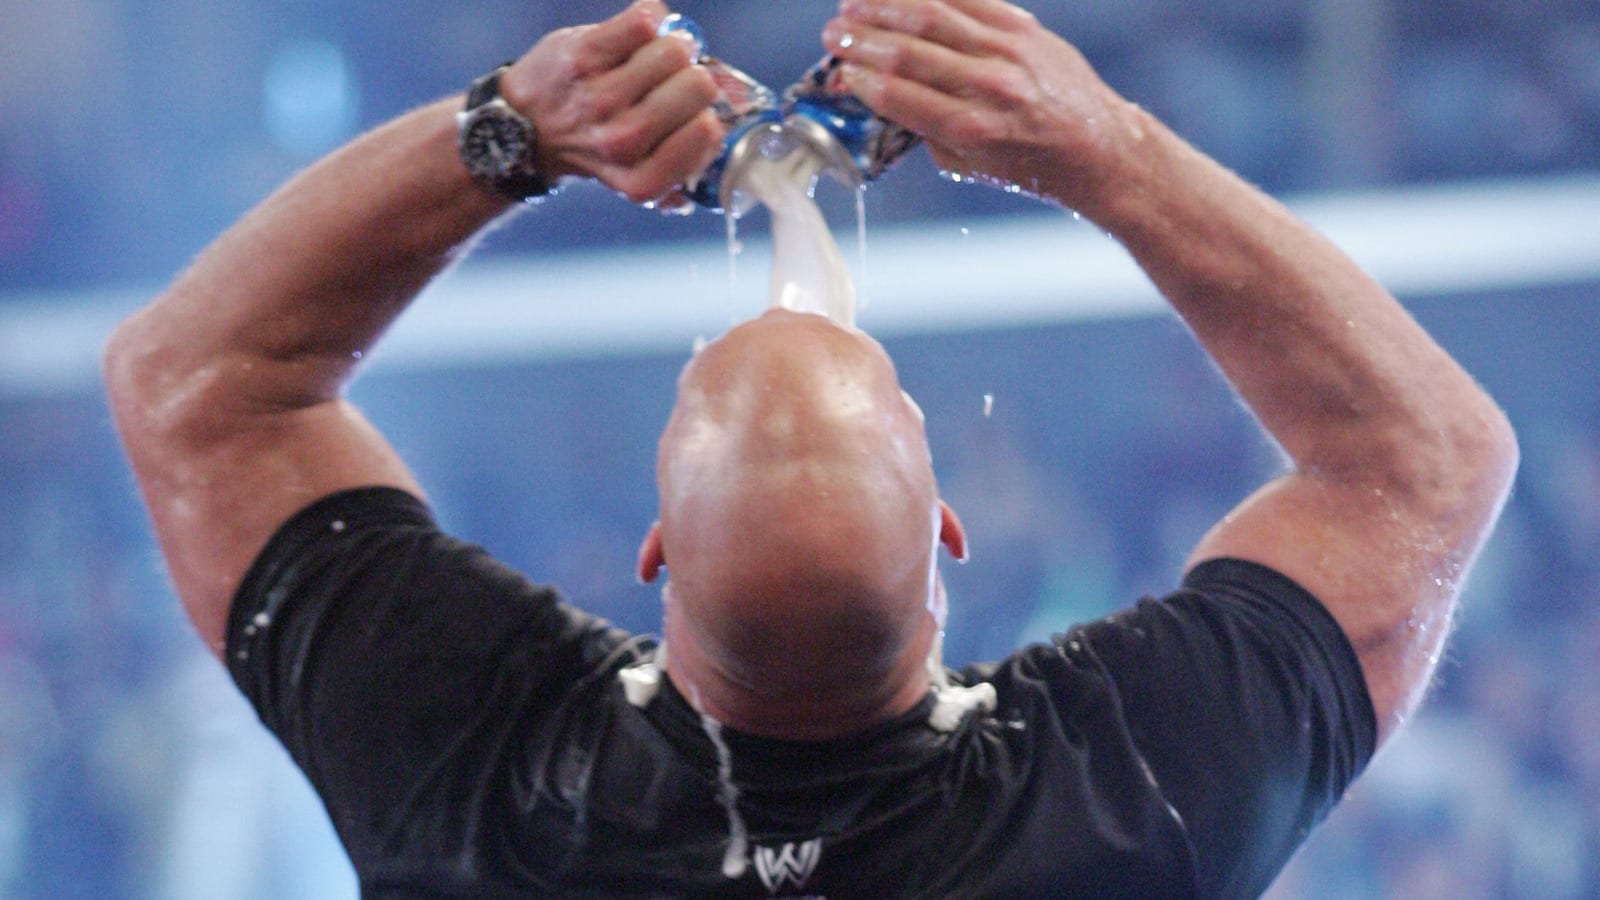 "Stone Cold" Steve Austin has his own craft beer